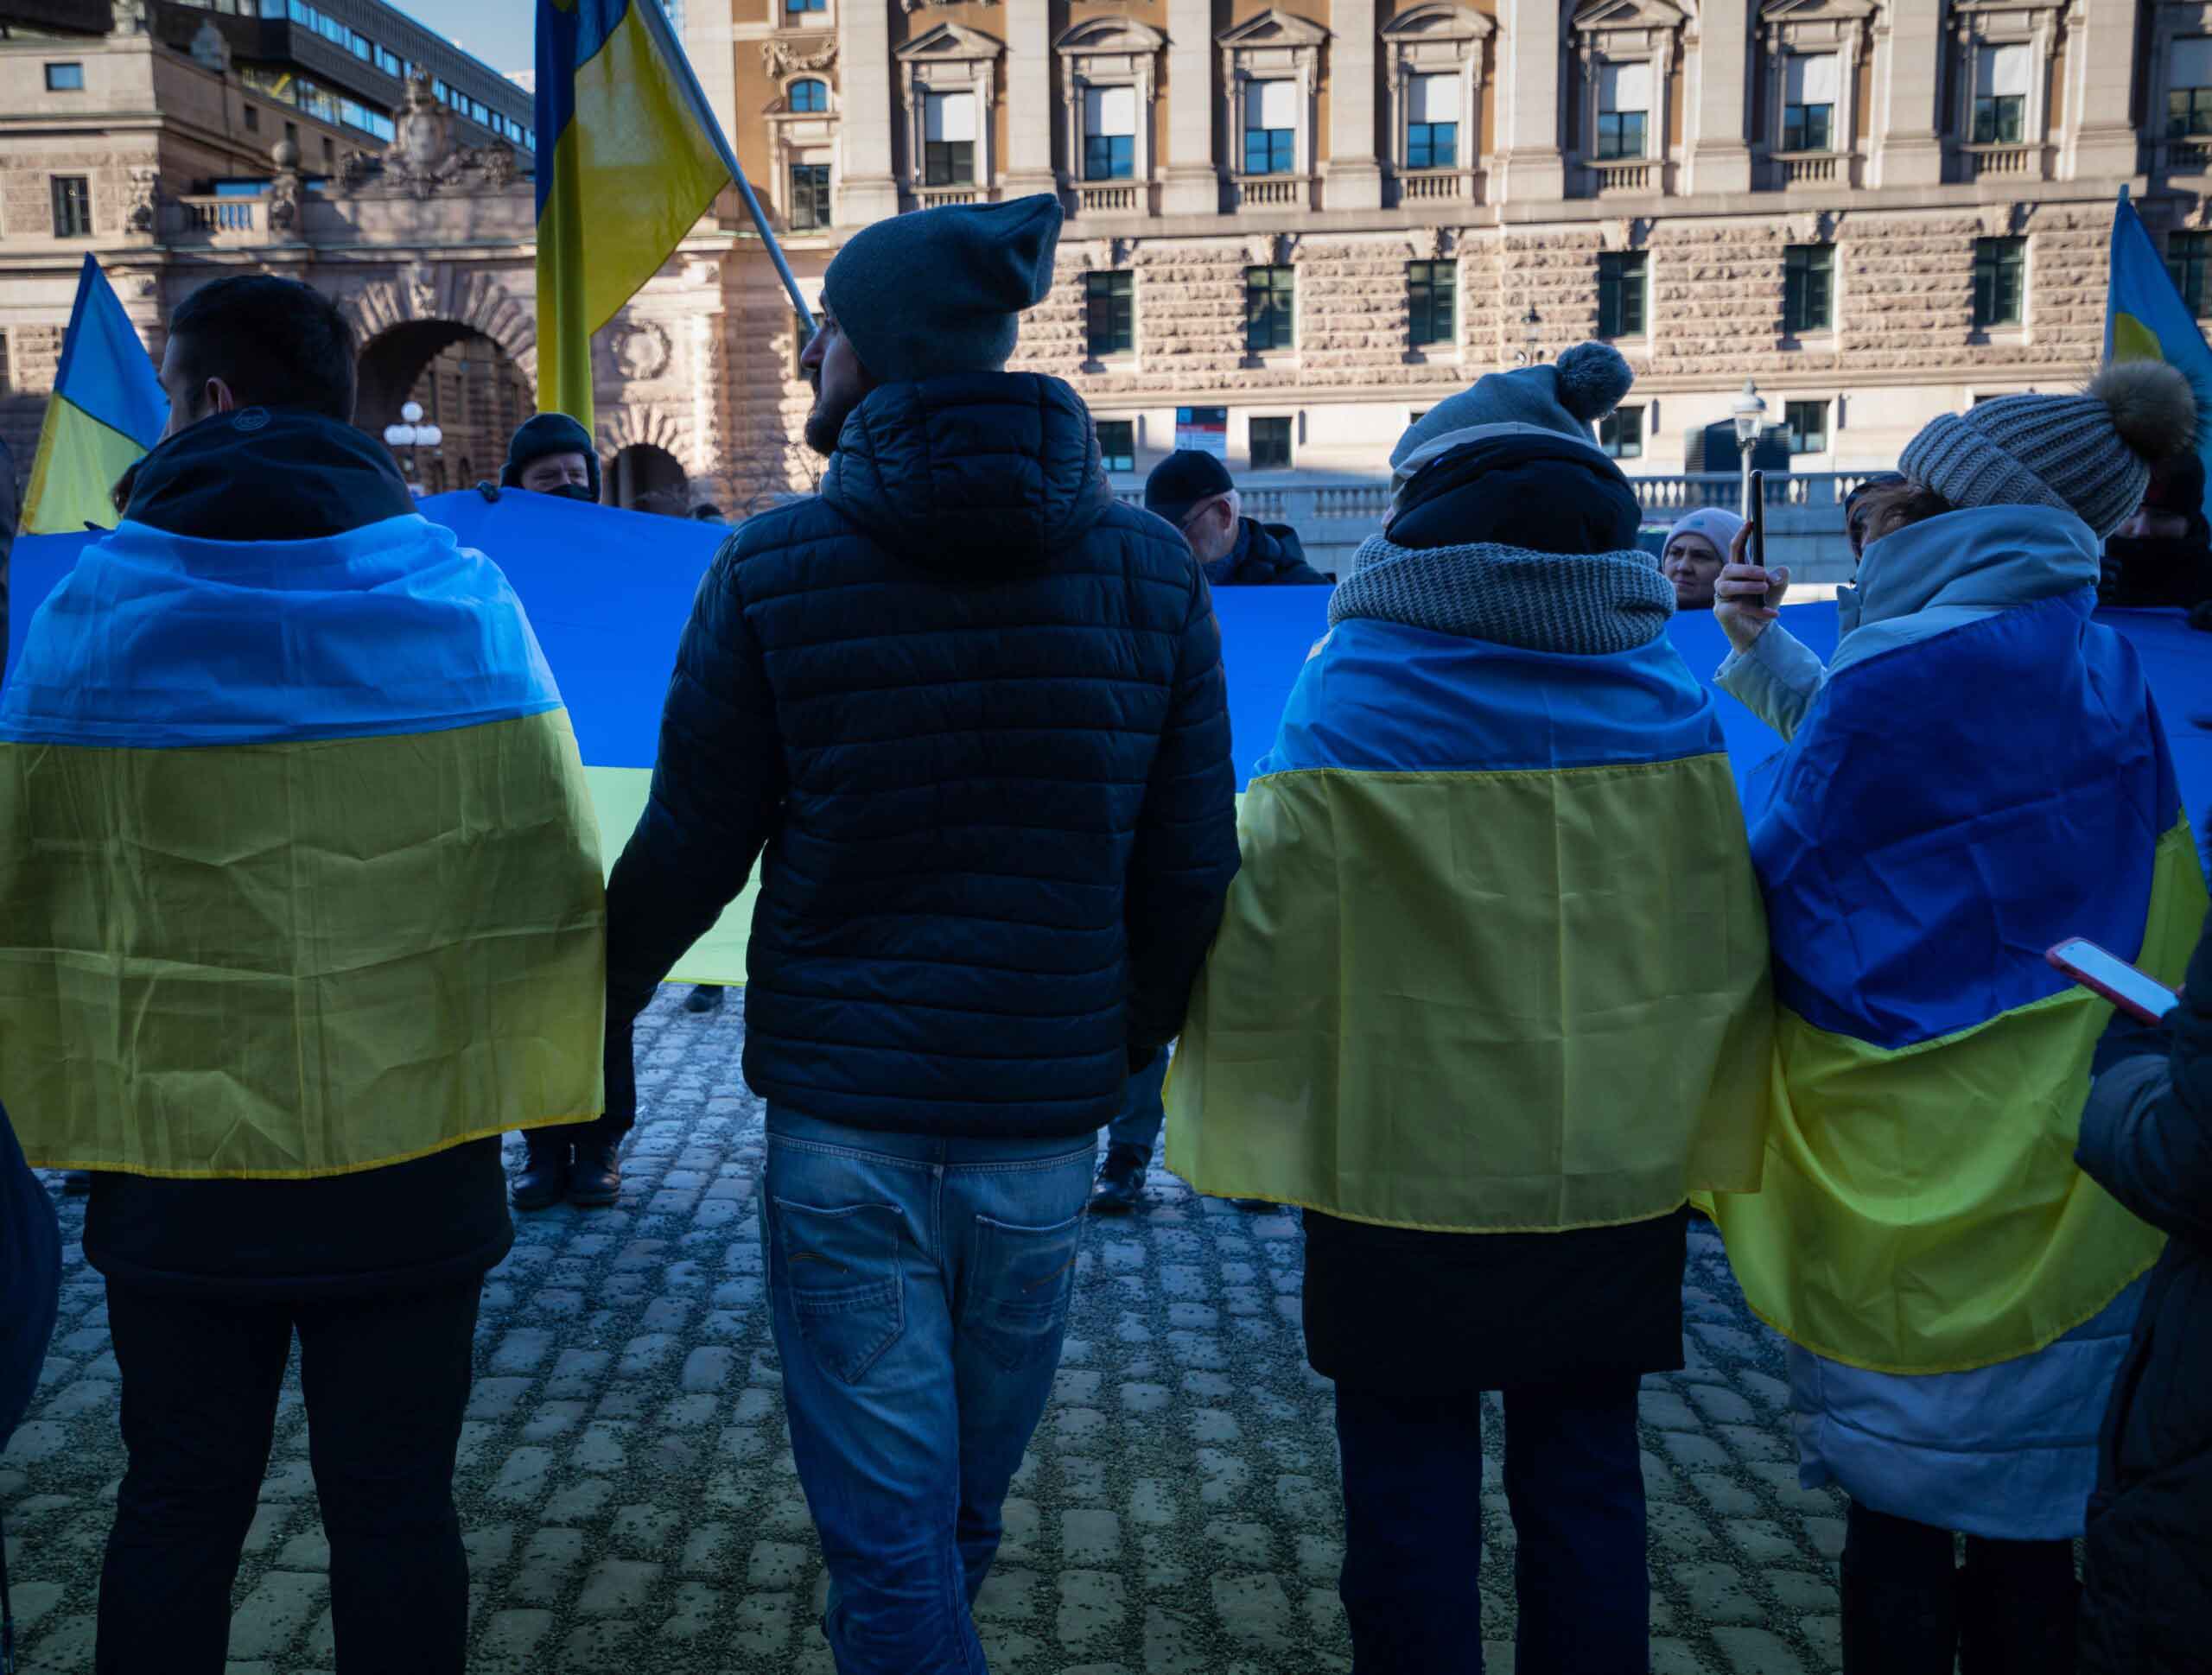 Many people hold hands in solidarity with ukrainian flags on their back